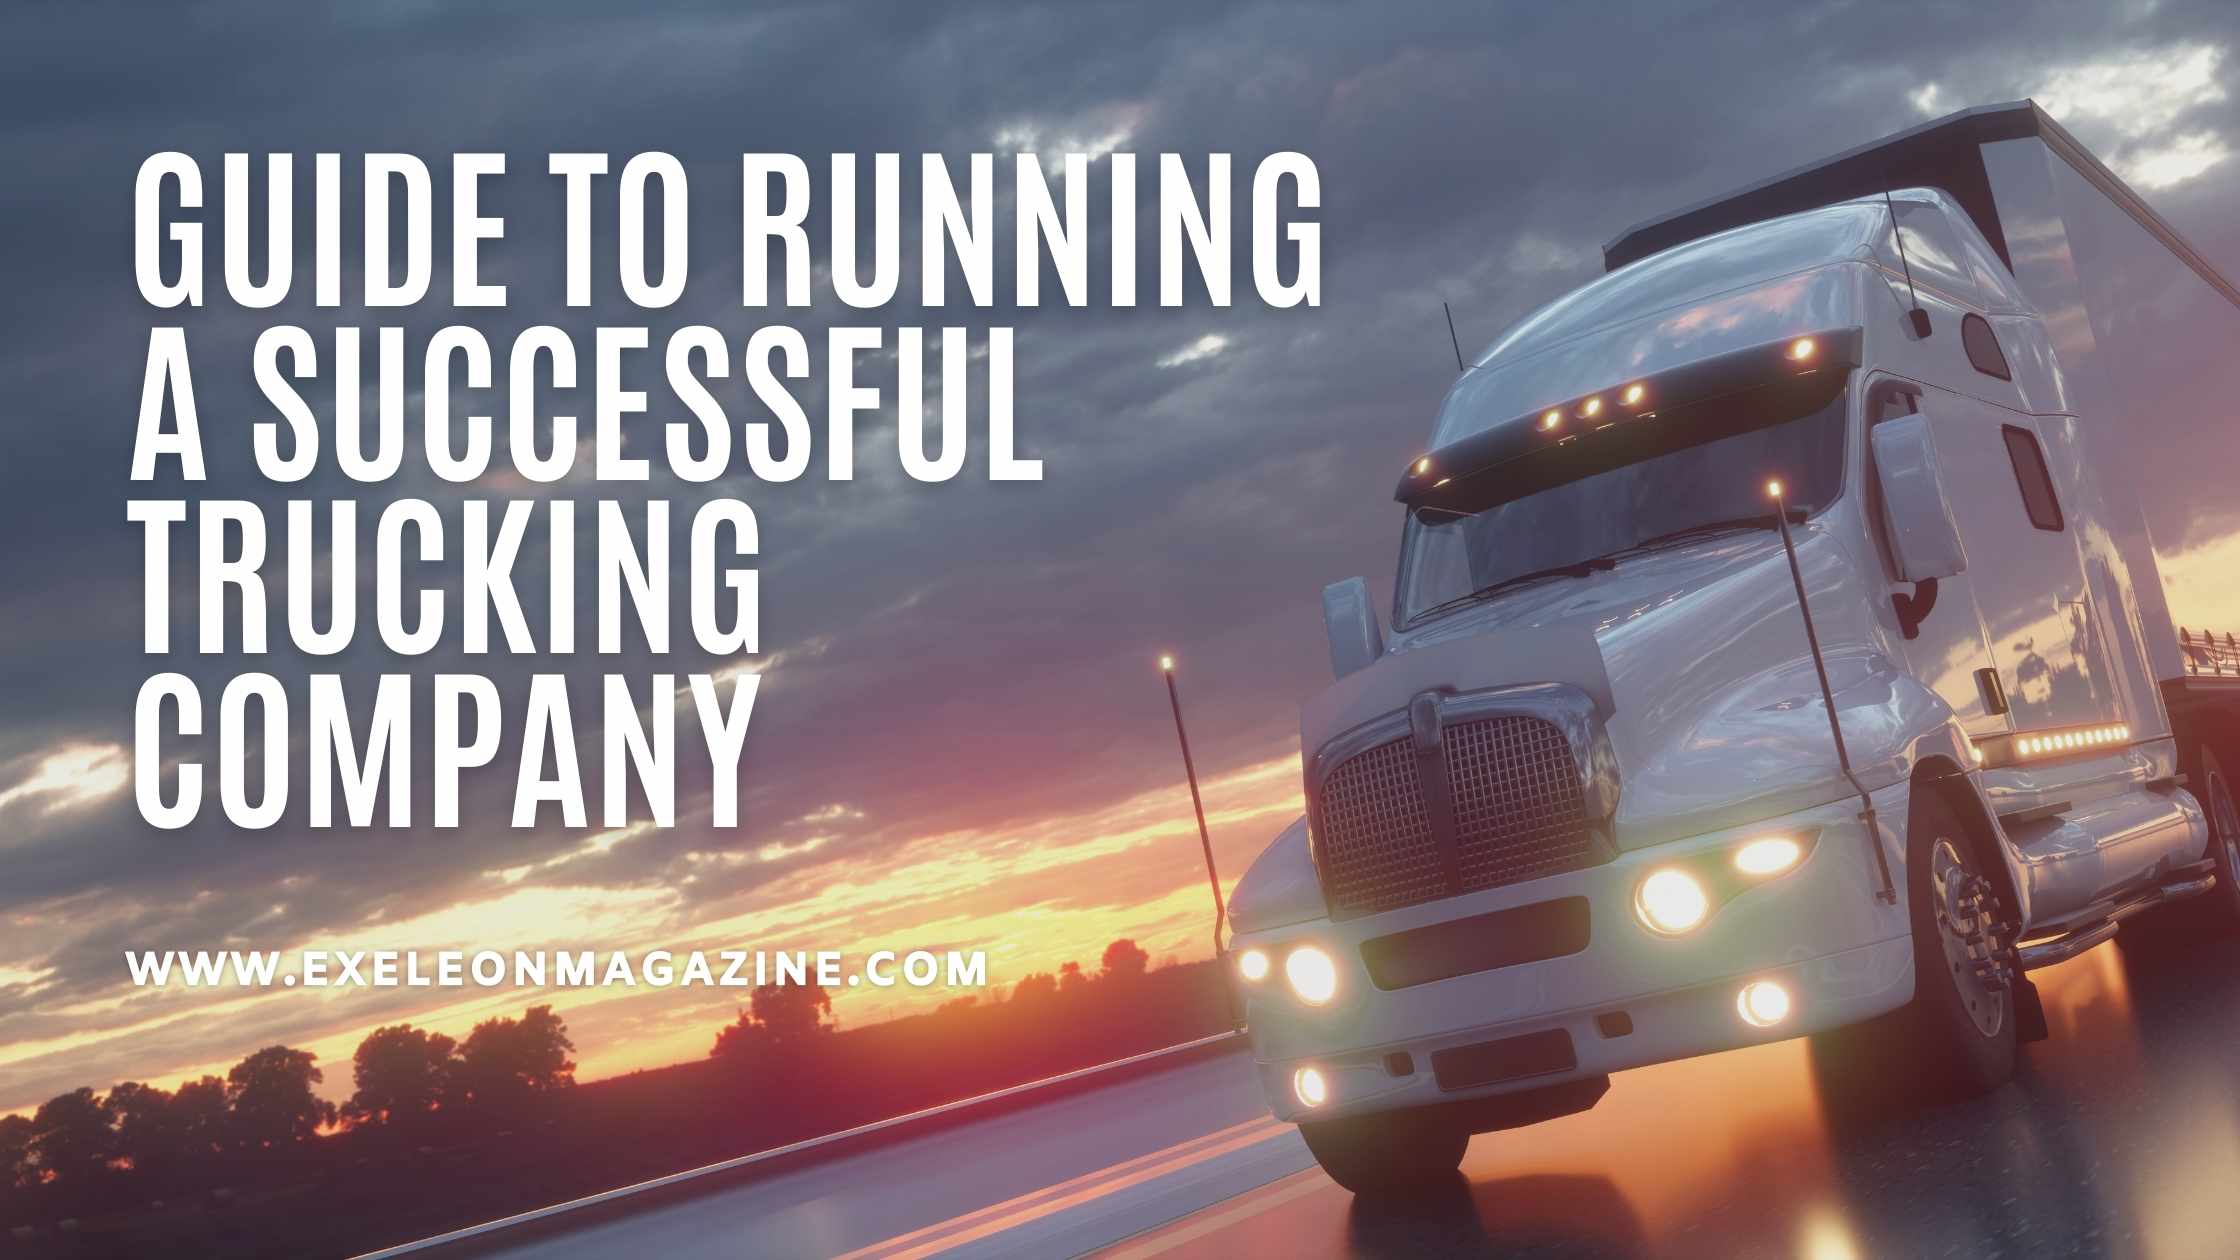 Guide to Running a Successful Trucking Company